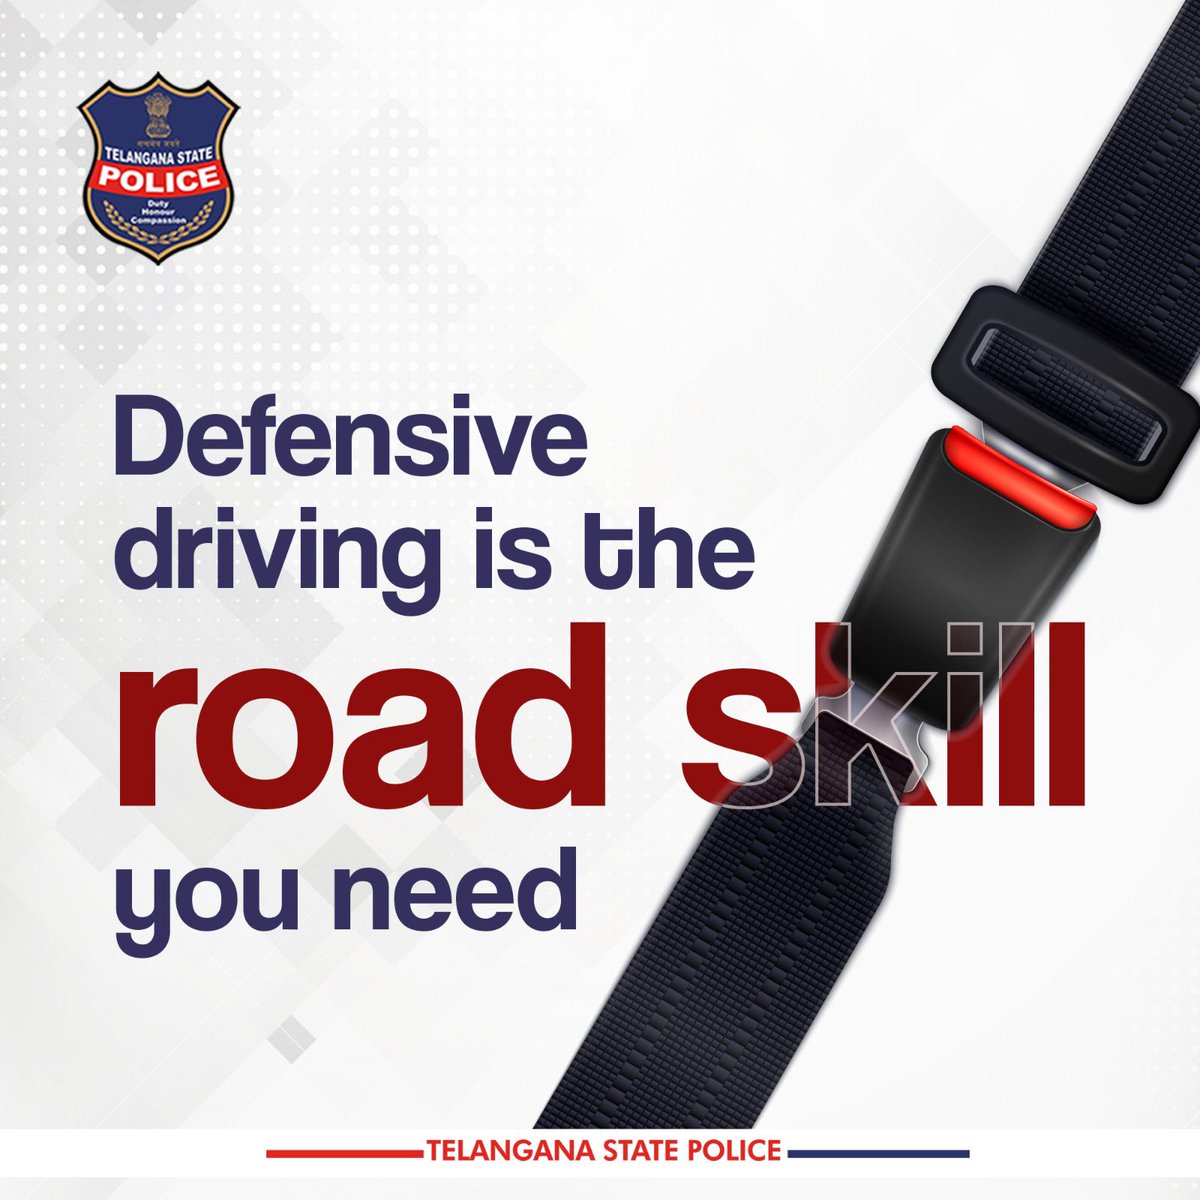 Wearing your helmet and seat belt makes it a default habit to keep yourself safe.

#DefensiveDriving #RoadSafety #TelanganaPolice